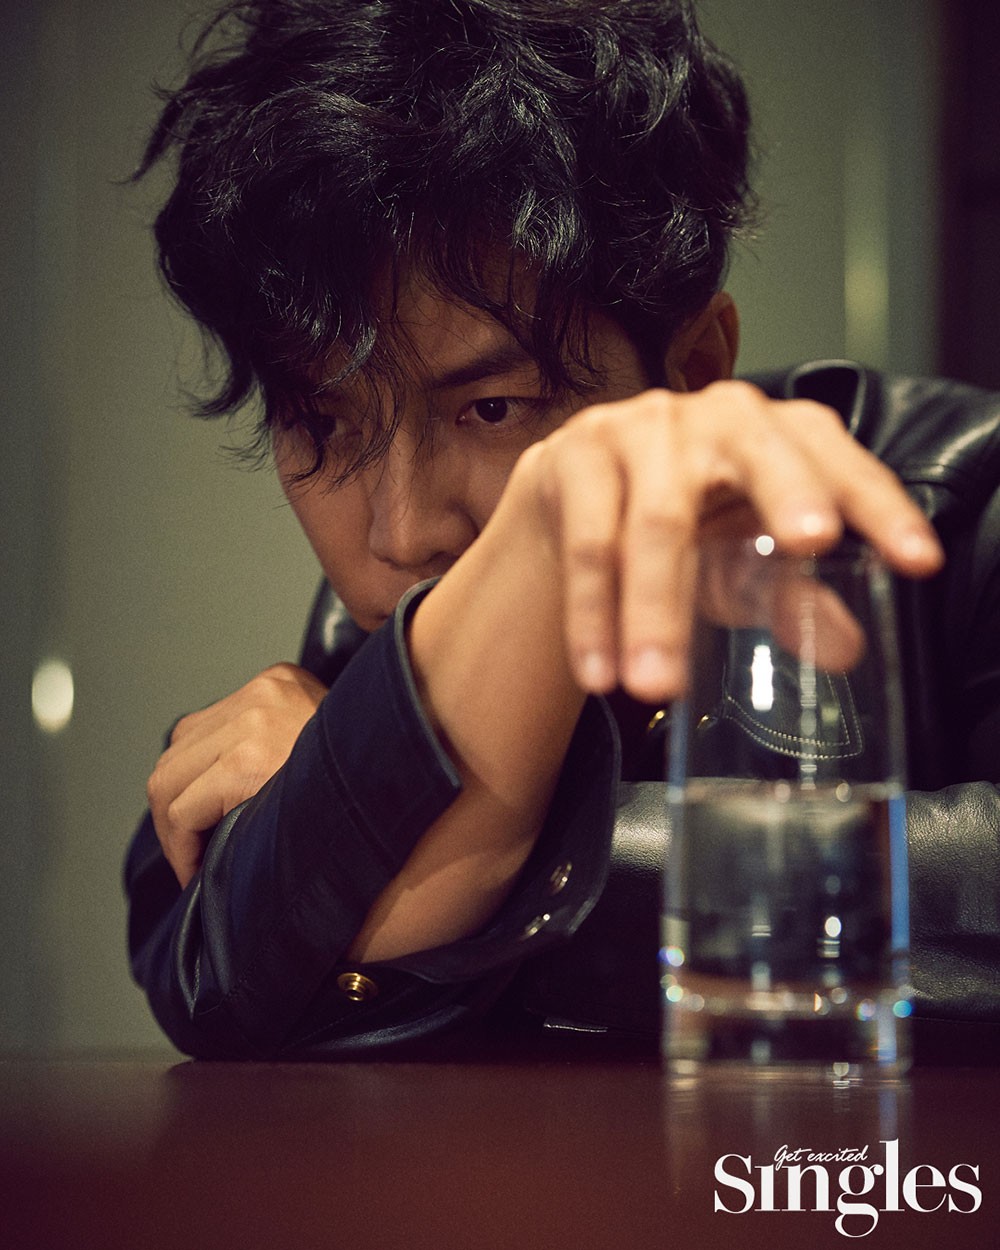 Actor Lee Seung-gi left the rough charm of Cha Dal-geon in Vagabond as a picture.Lee Seung-gi has appeared as a cover model for the December issue of fashion magazine Singles.He is currently working on the SBS gilt drama Vagabond as a chadal gun, and he is the back door that he overwhelmed Sight with his charismatic eyes and led the atmosphere of the filming scene.Lee Seung-gi, who has been building his world for 15 years since his debut, has been authentic to his character.The director also said that I have an image that can make me believe in the ignorant sense of justice and behavior of Cha Dal-geon, he said. I focused on the Feeling of Cha Dal-geon as a human being to meet these expectations and acted.Lee Seung-gi, who was able to confirm his own acting in Vagabond after a year because of the pre-production drama, said, I saw my acting in an objective sight.There were scenes where I regretted seeing things that I believed to have done well, and I am more humble because I think I am right and things that I believed are changing or changing. As for the background of becoming more mature as an actor, he said, I think there was a pride that I want to do anything well.I think theres a strong point in how I want to prove to people who dont want to be ignored by others, want to be praised, and trust me, he said.Lee Seung-gi, who has achieved a lot as an entertainer by demonstrating his true value in various fields such as singing, acting, progressing, and entertainment.When asked about the goal of achieving more, he said, I think it is still less filled, but I am satisfied with it now than I want to achieve more because I want to do it for the rest of my life. The value of life is happiness.So I do not have to do a little job, but I think I am living hard and thinking endlessly about what happiness is. Lee Seung-gi also said, I do not think the way Lee Seung-gi walked is bad, who can be a milestone for someone.I want to remain a person who can inspire me to do it. 